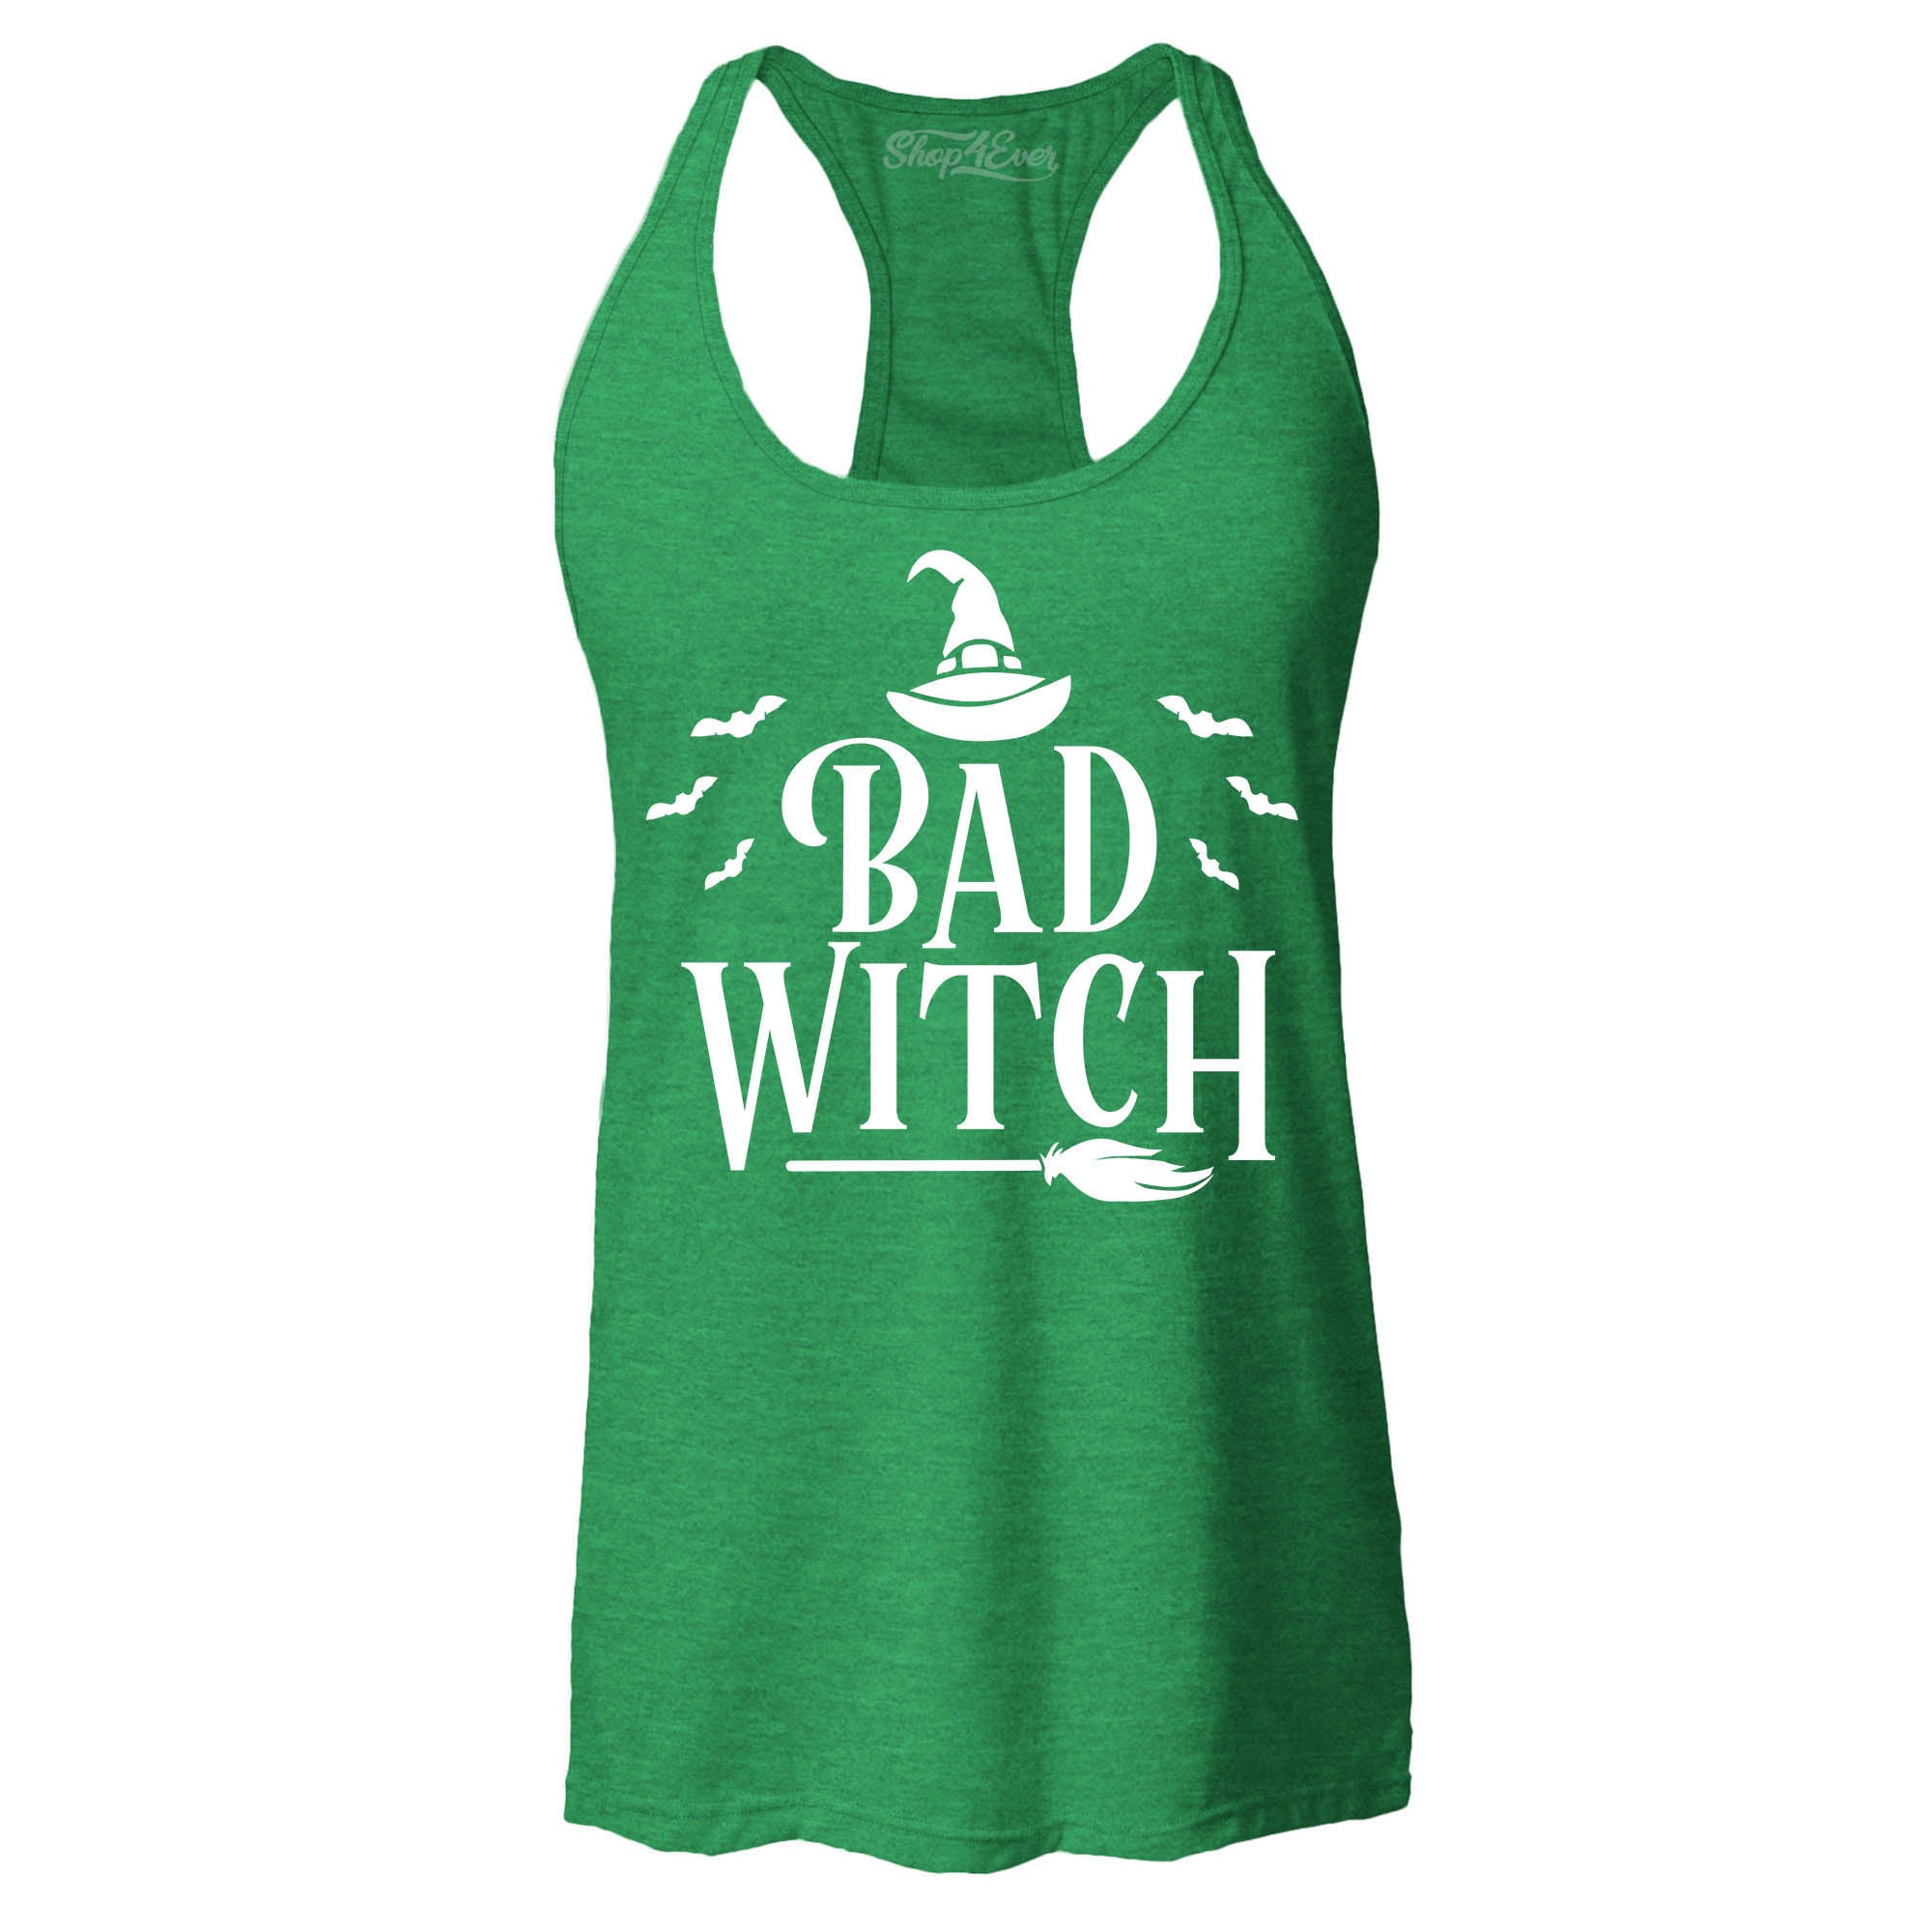 Good Witch ~ Bad Witch Matching Costume Women's Racerback Tank Top Slim Fit